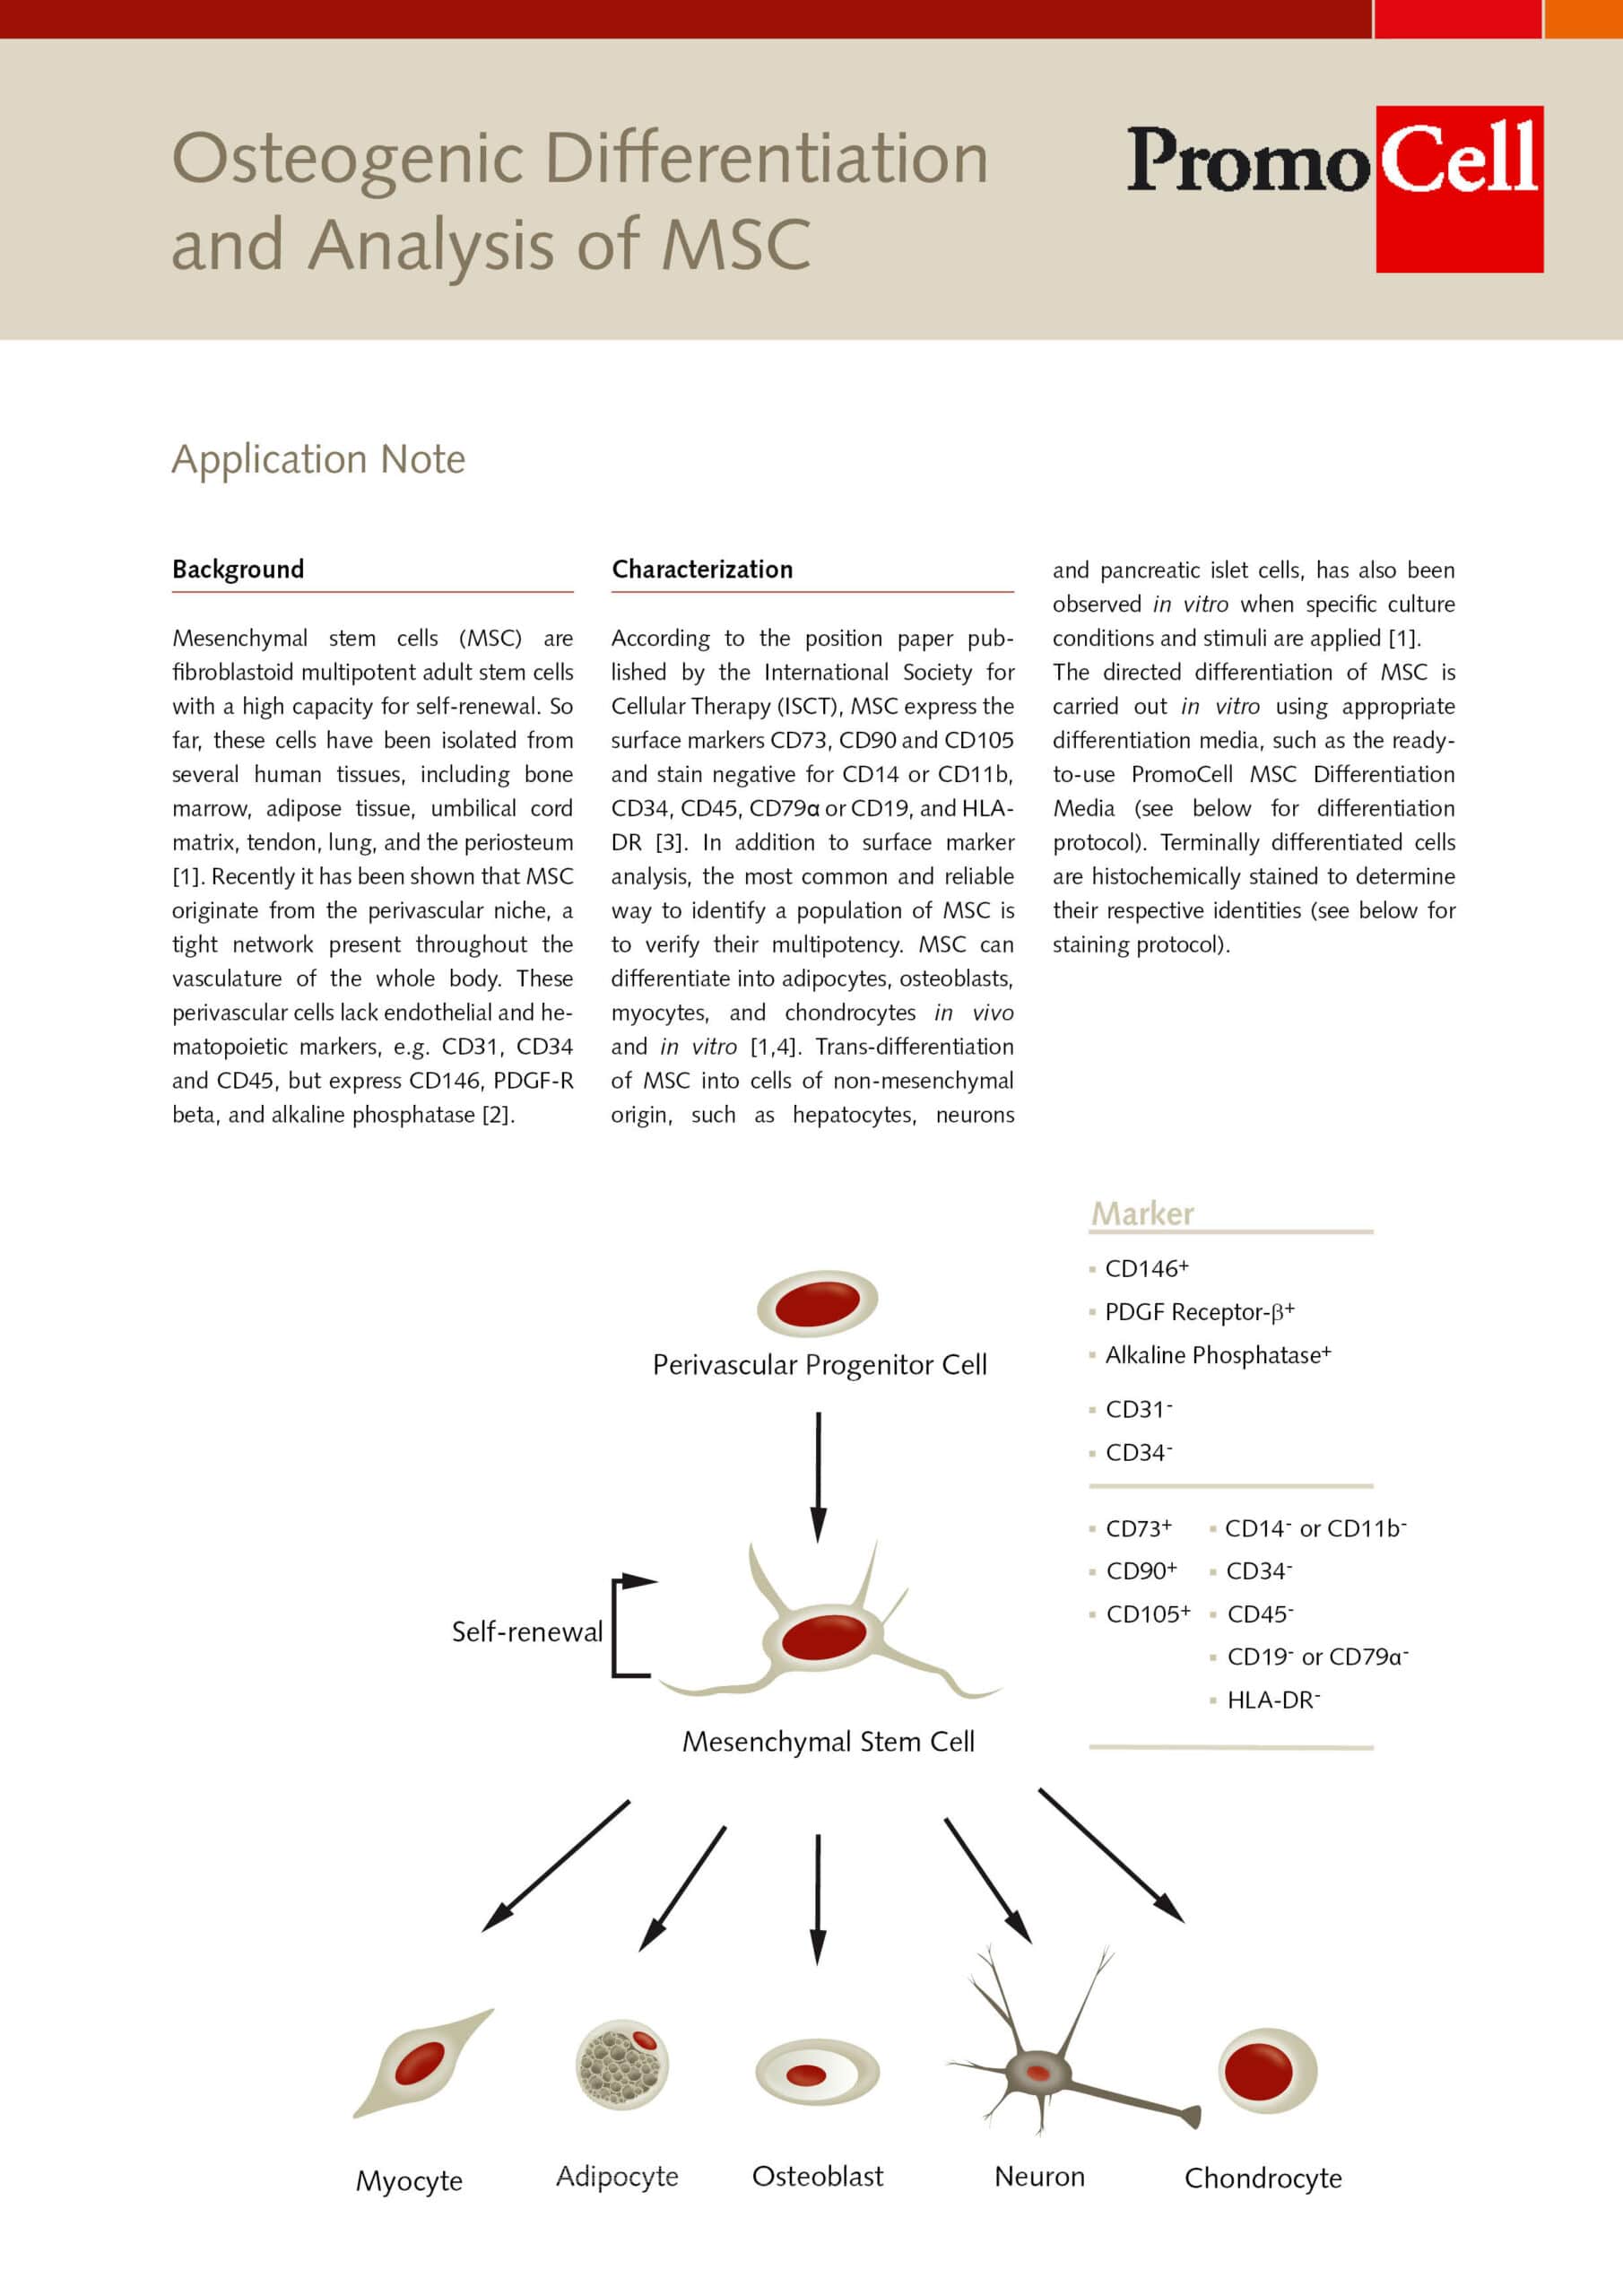 AppNote_Osteogenic-Differentiation-and-Analysis-of-MSC_Thumbnail